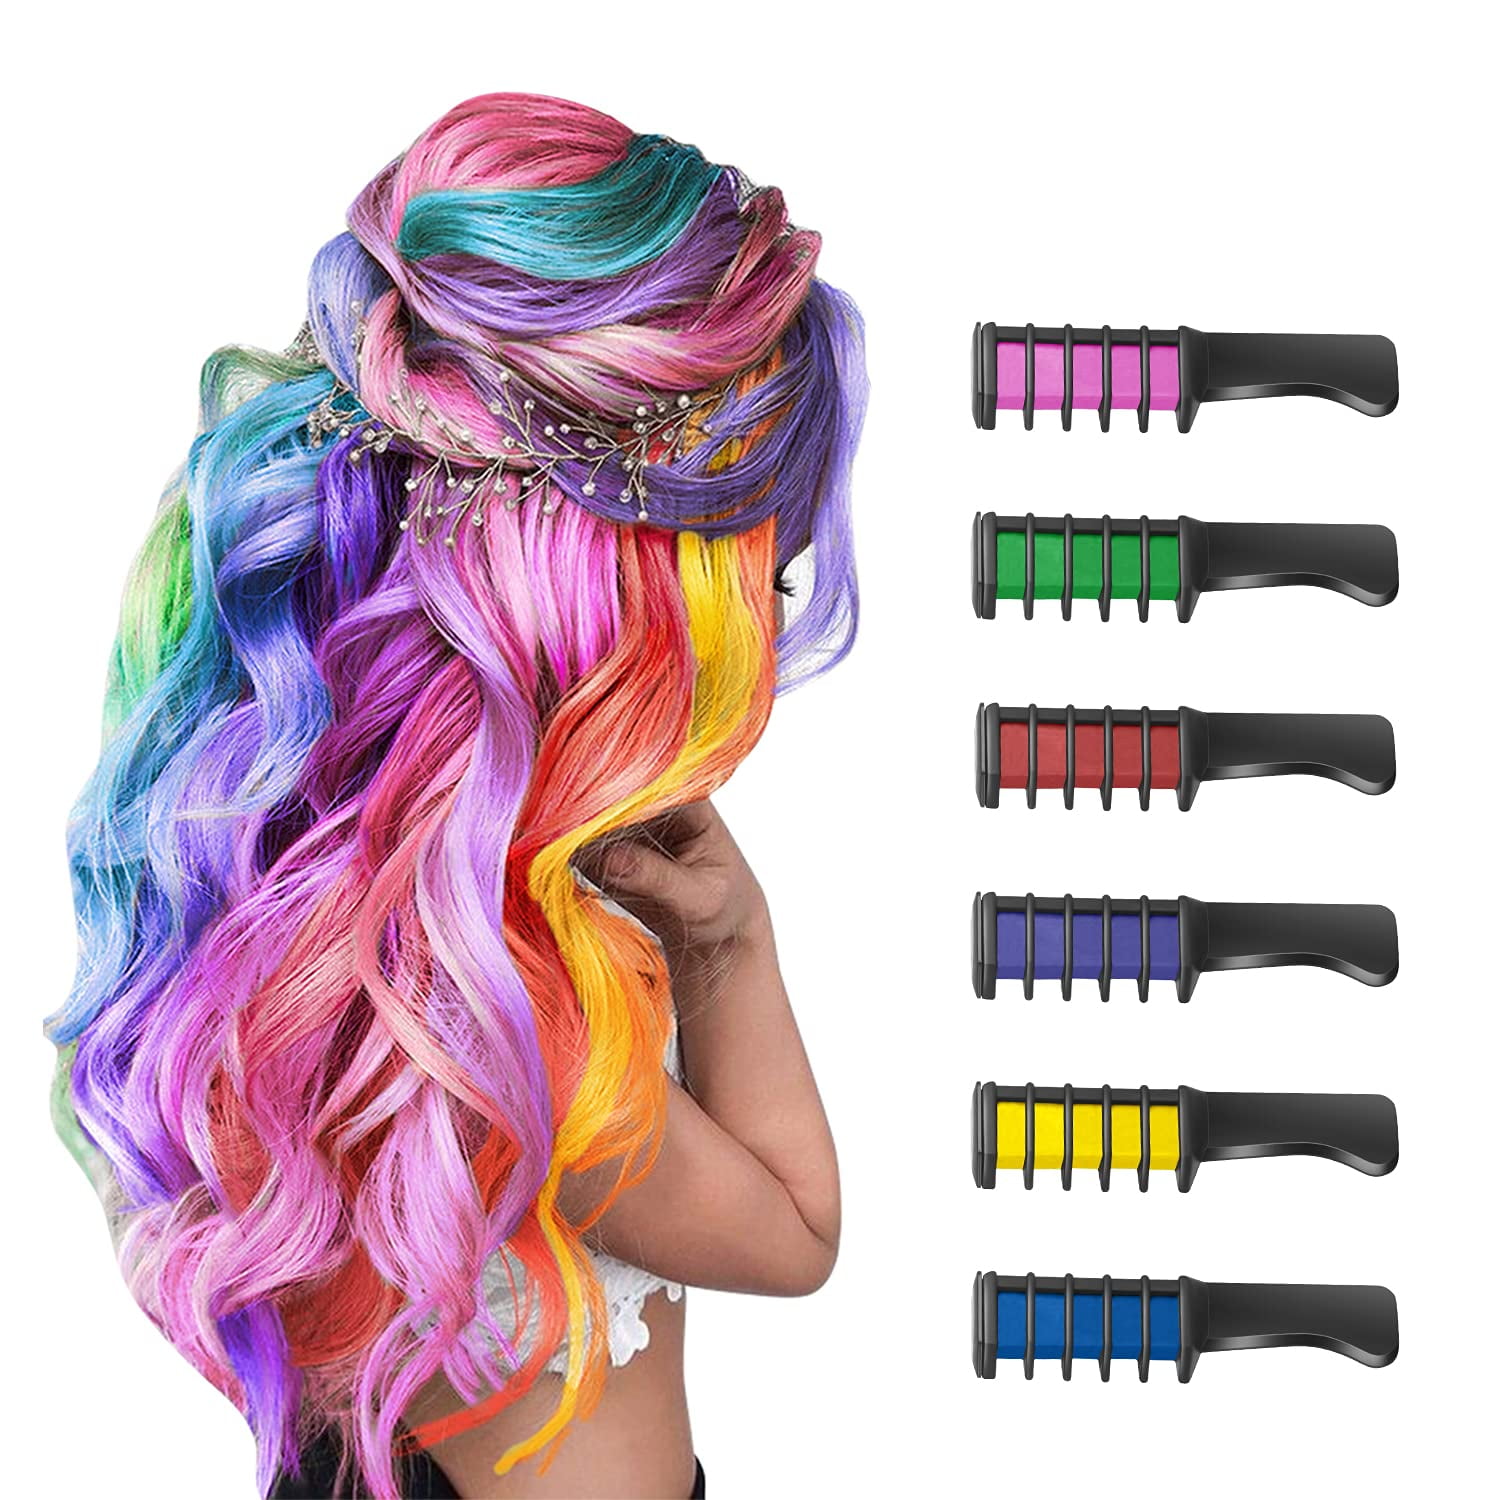 10 Colors Disposable Temporary Dye Stick Hair Dye Comb Hair Dye Hair Dye  Brush Hair Dye Chalk Make Up Easy To Color And Clean  Hair Color   AliExpress